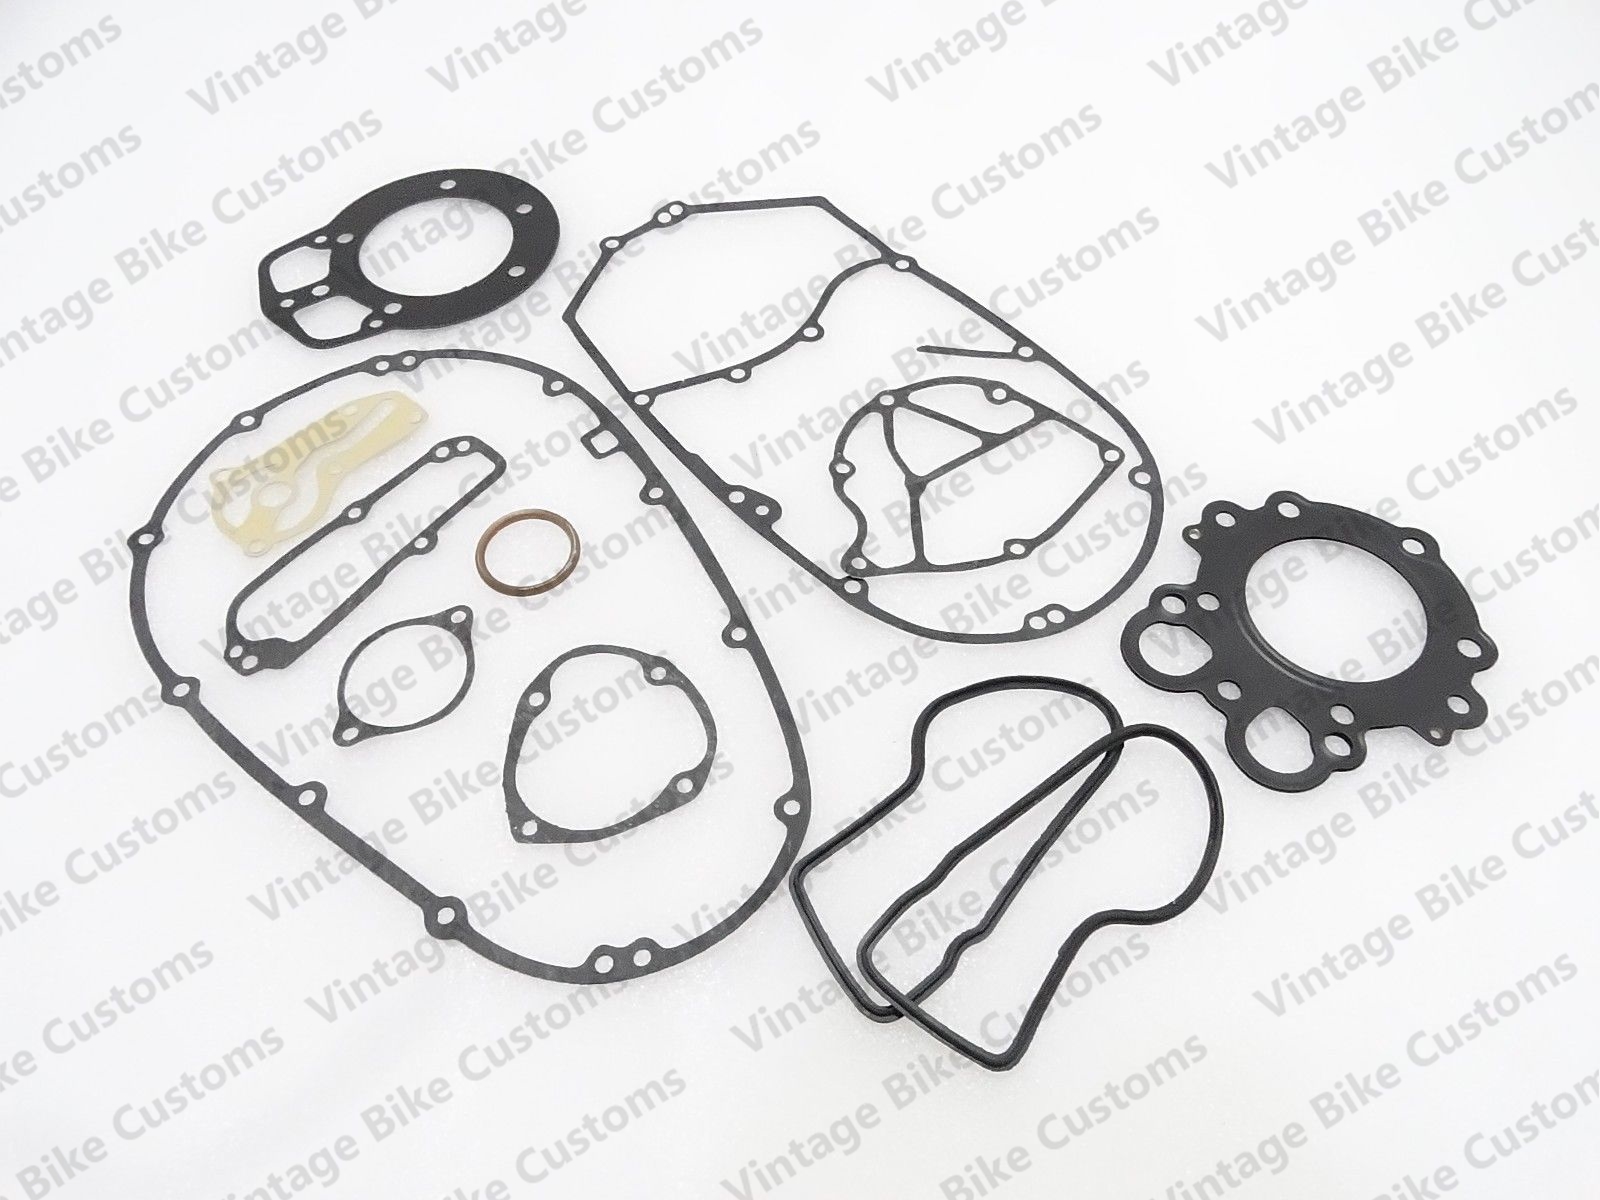 Details about   ROYAL ENFIELD CLASSIC TWIN SPARK UCE 350CC COMPLETE GASKET SET 